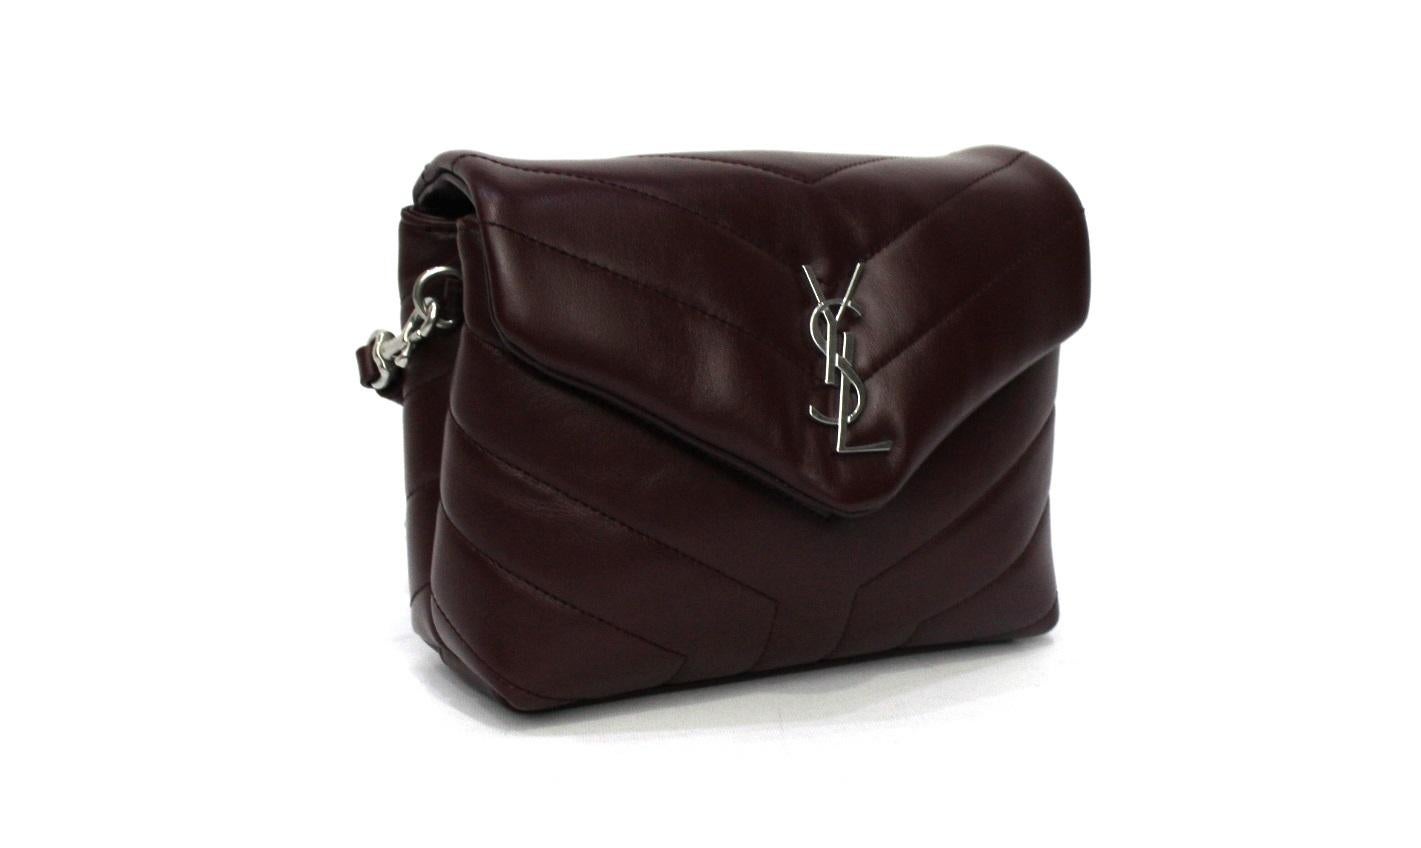 Saint Laurent Toy Lou Lou model bag made in burgundy leather with silver hardware.

Magnetic button closure, internally capacious for the essentials.

The bag is in excellent condition.